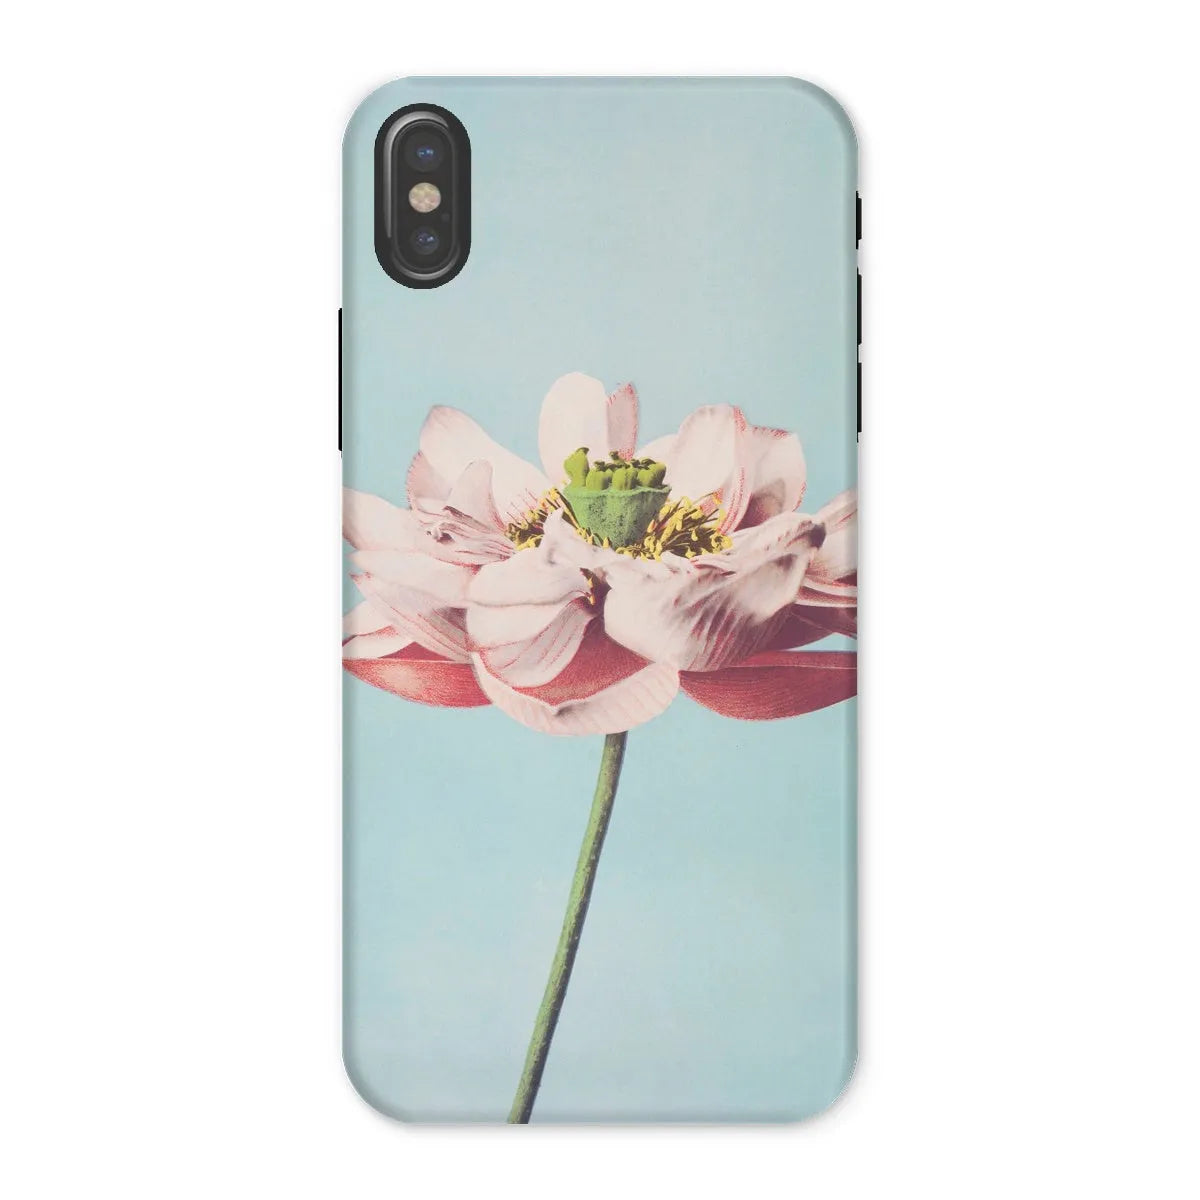 Pink Water Lily By Kazumasa Ogawa Art Phone Case - Iphone x / Matte - Mobile Phone Cases - Aesthetic Art